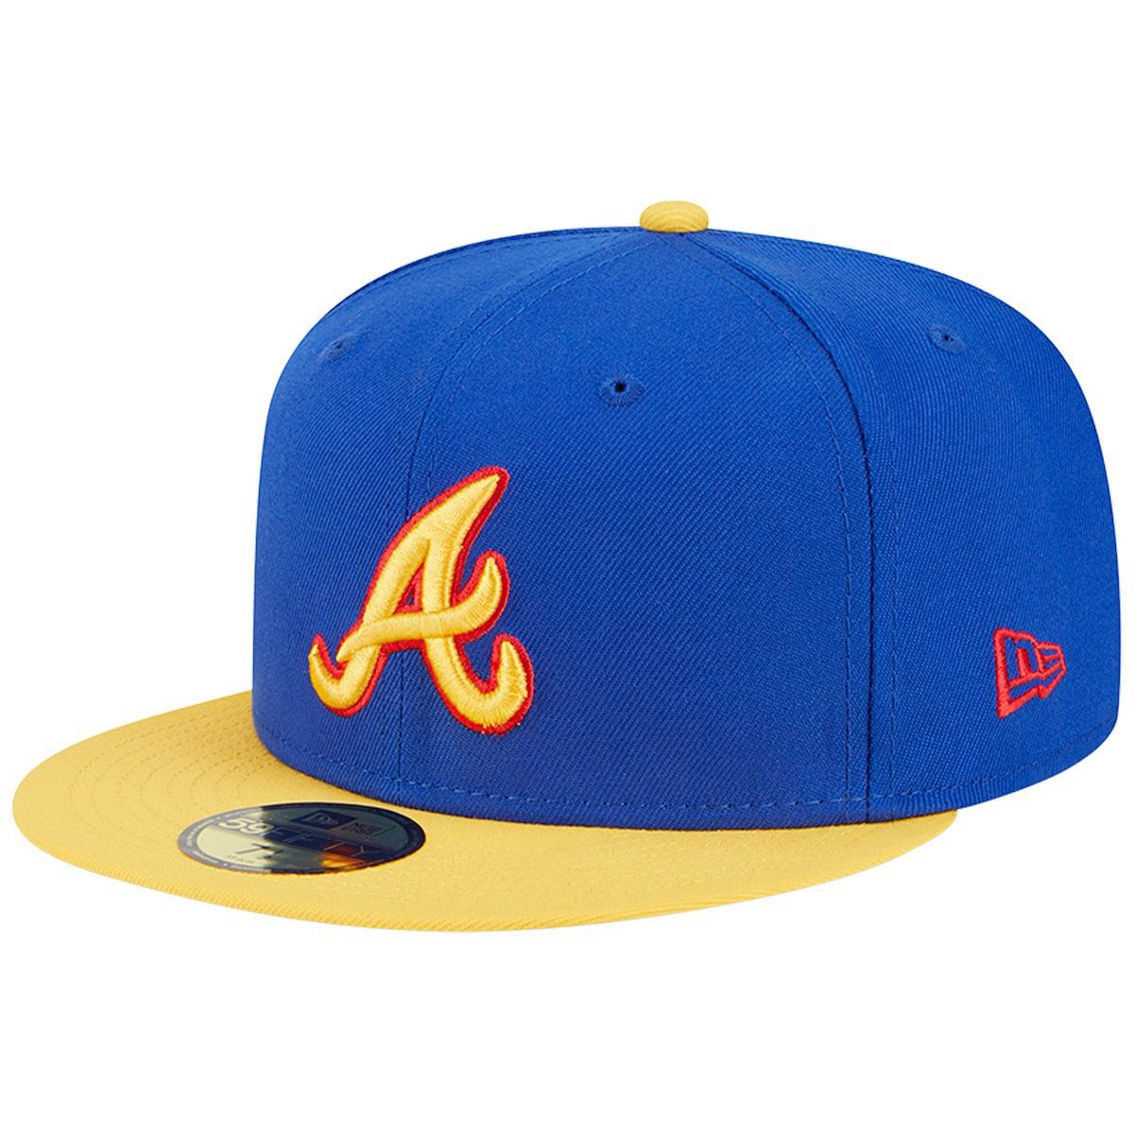 New Era Men's Royal/Yellow Atlanta Braves Empire 59FIFTY Fitted Hat - Image 4 of 4